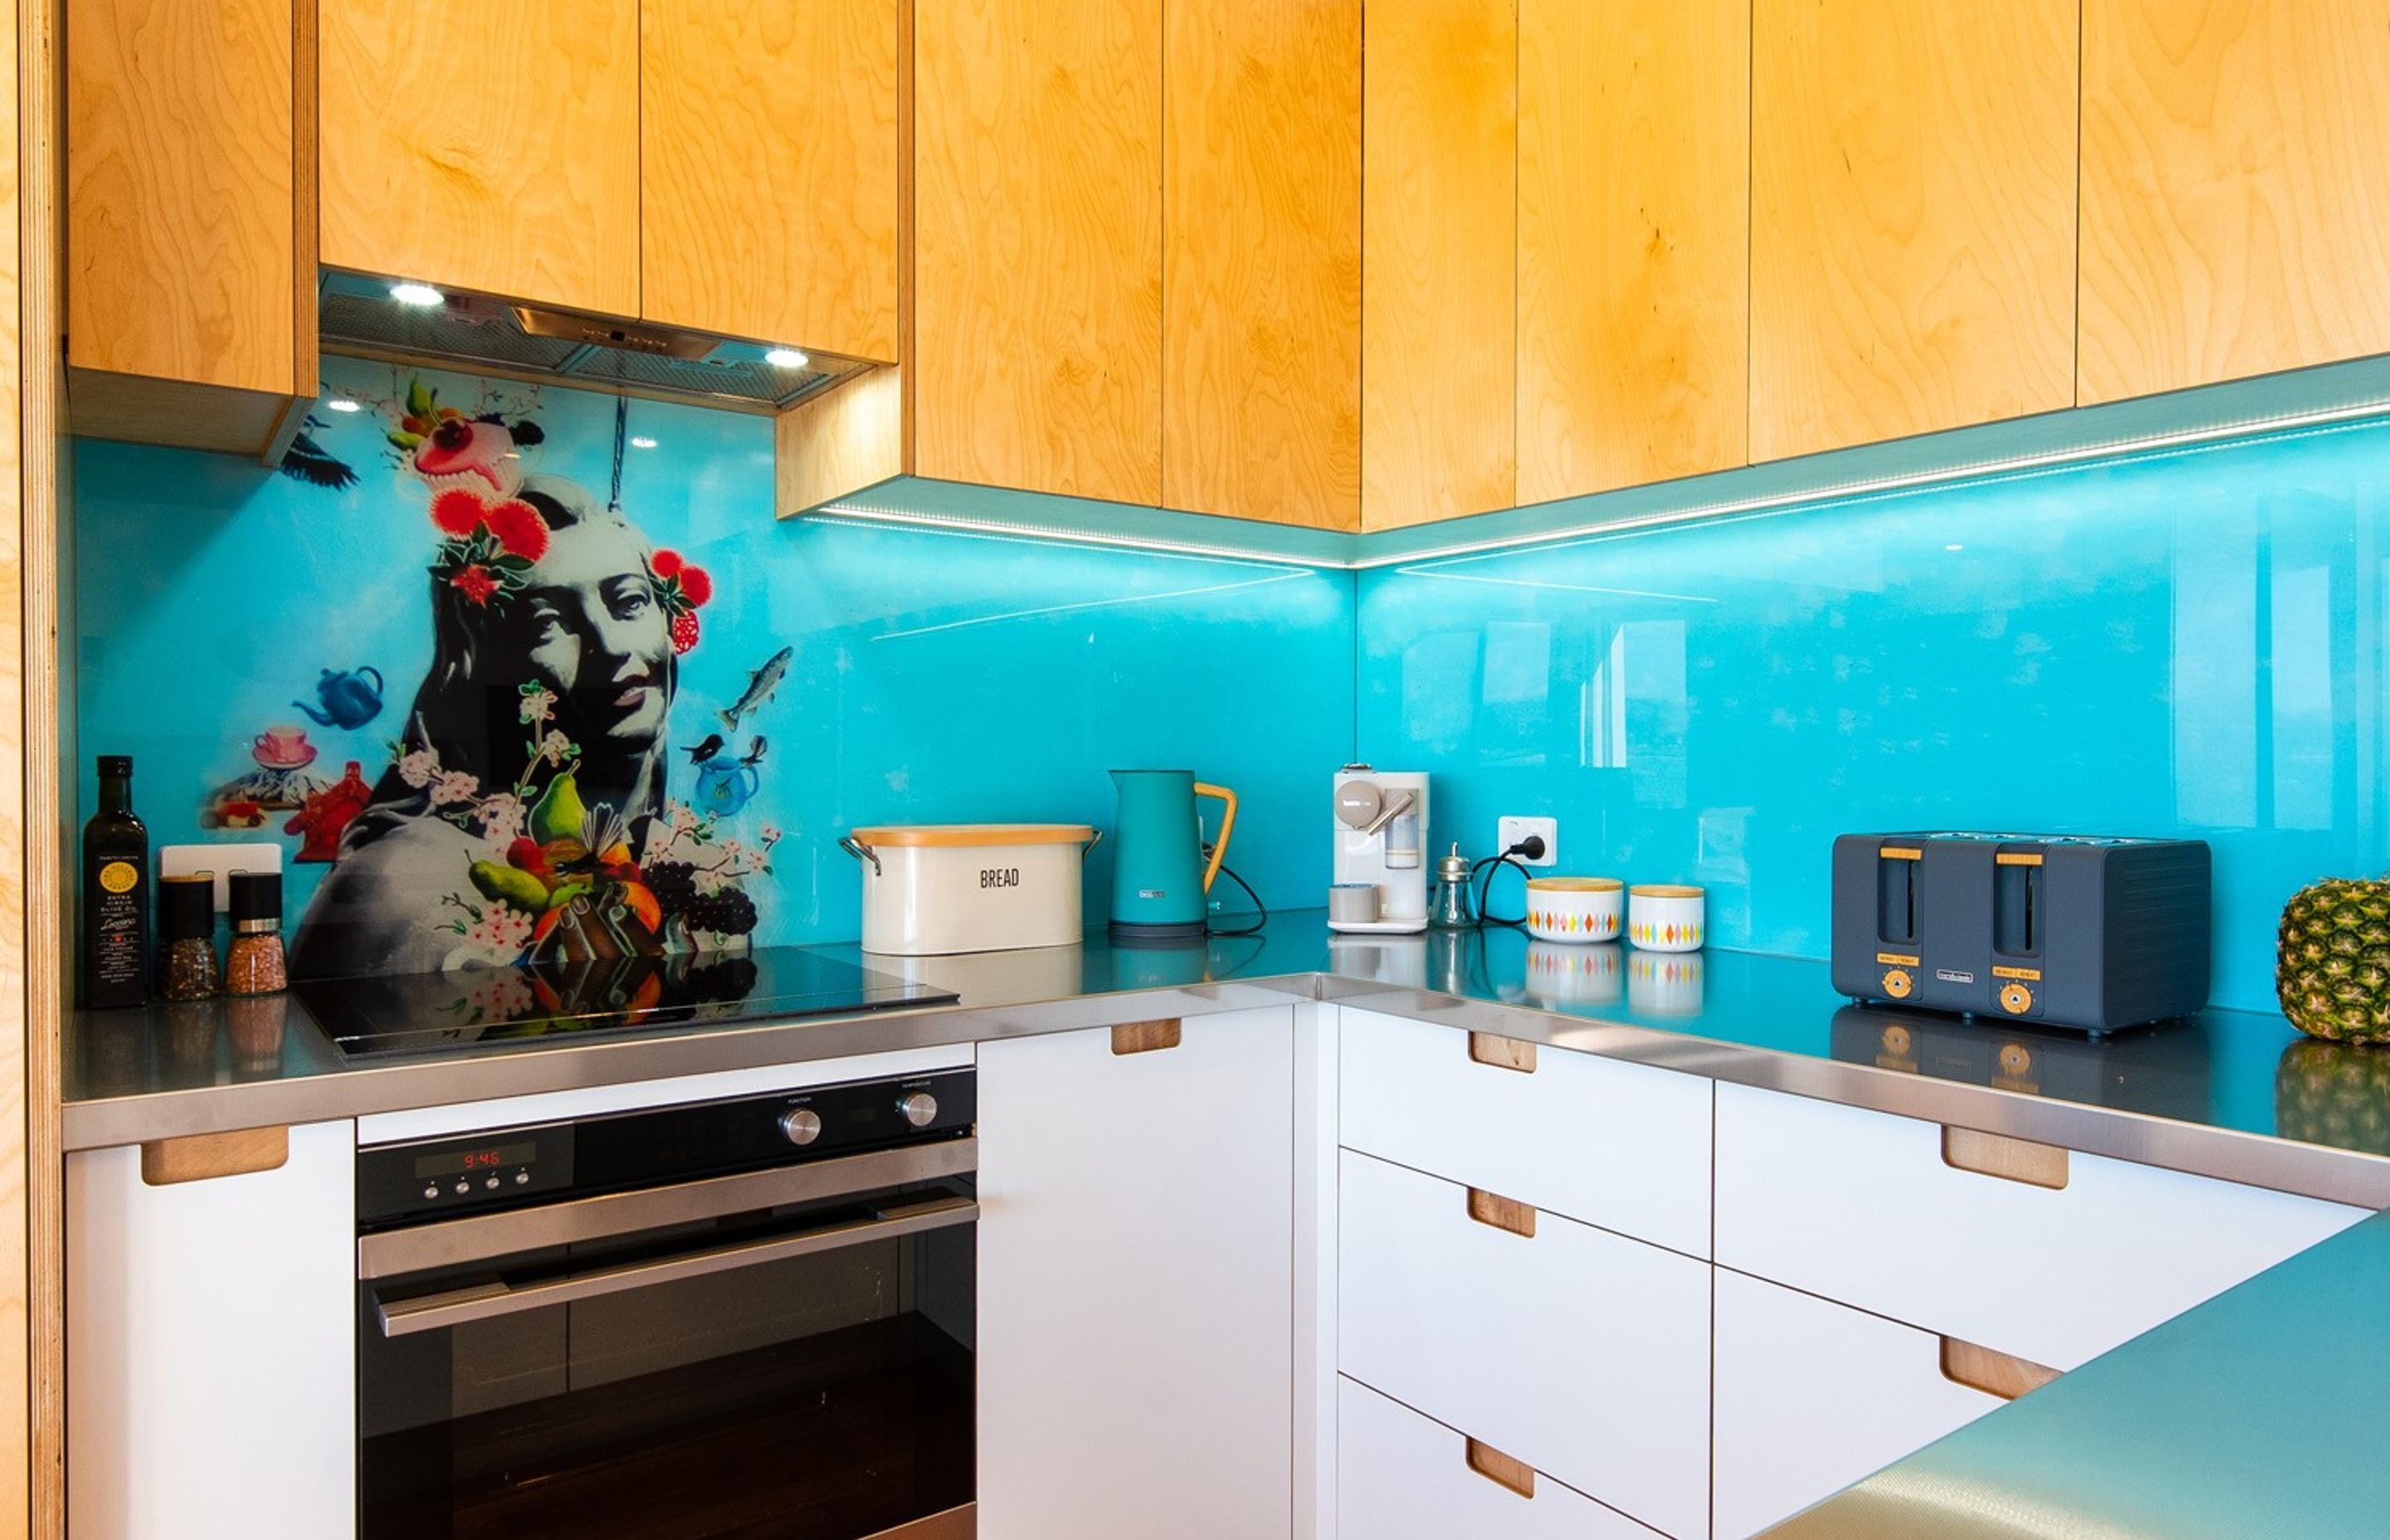 Plywood Kitchen with a colourful twist